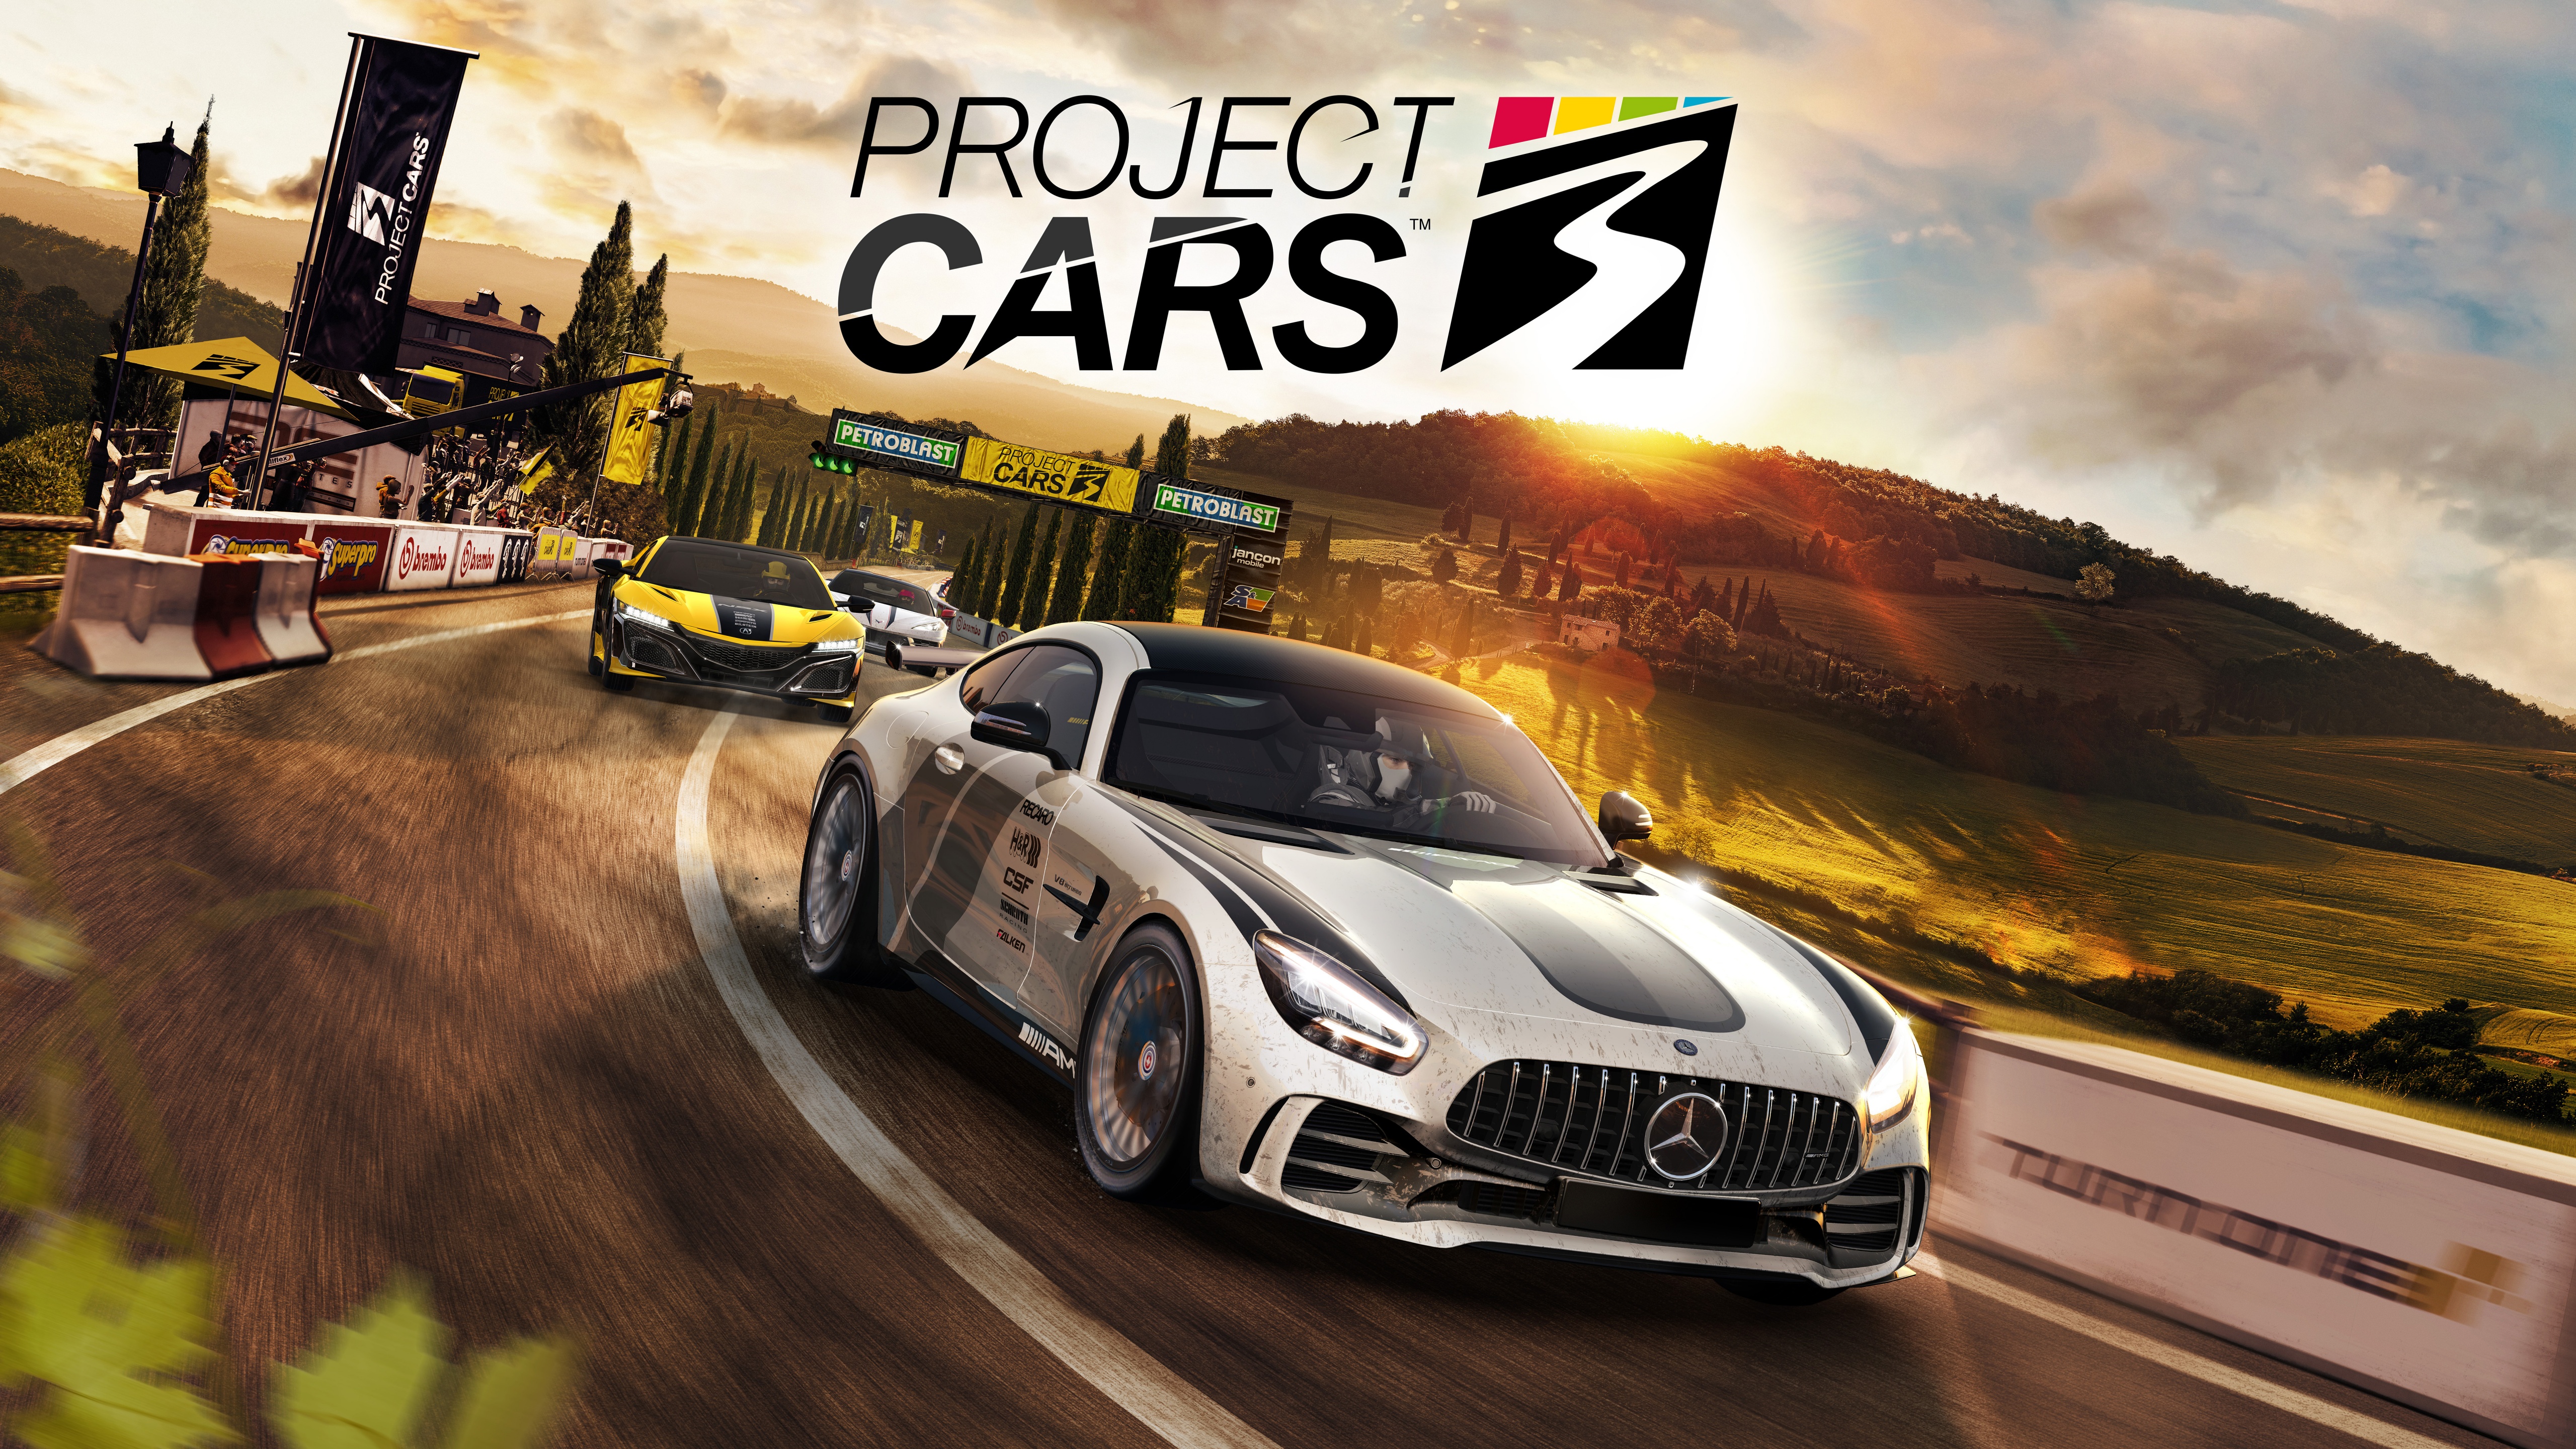 Project Cars 3 4k Wallpaper Mercedes Amg Gt R Pc Games Playstation 4 Xbox One Games 5k 8k Games 1629